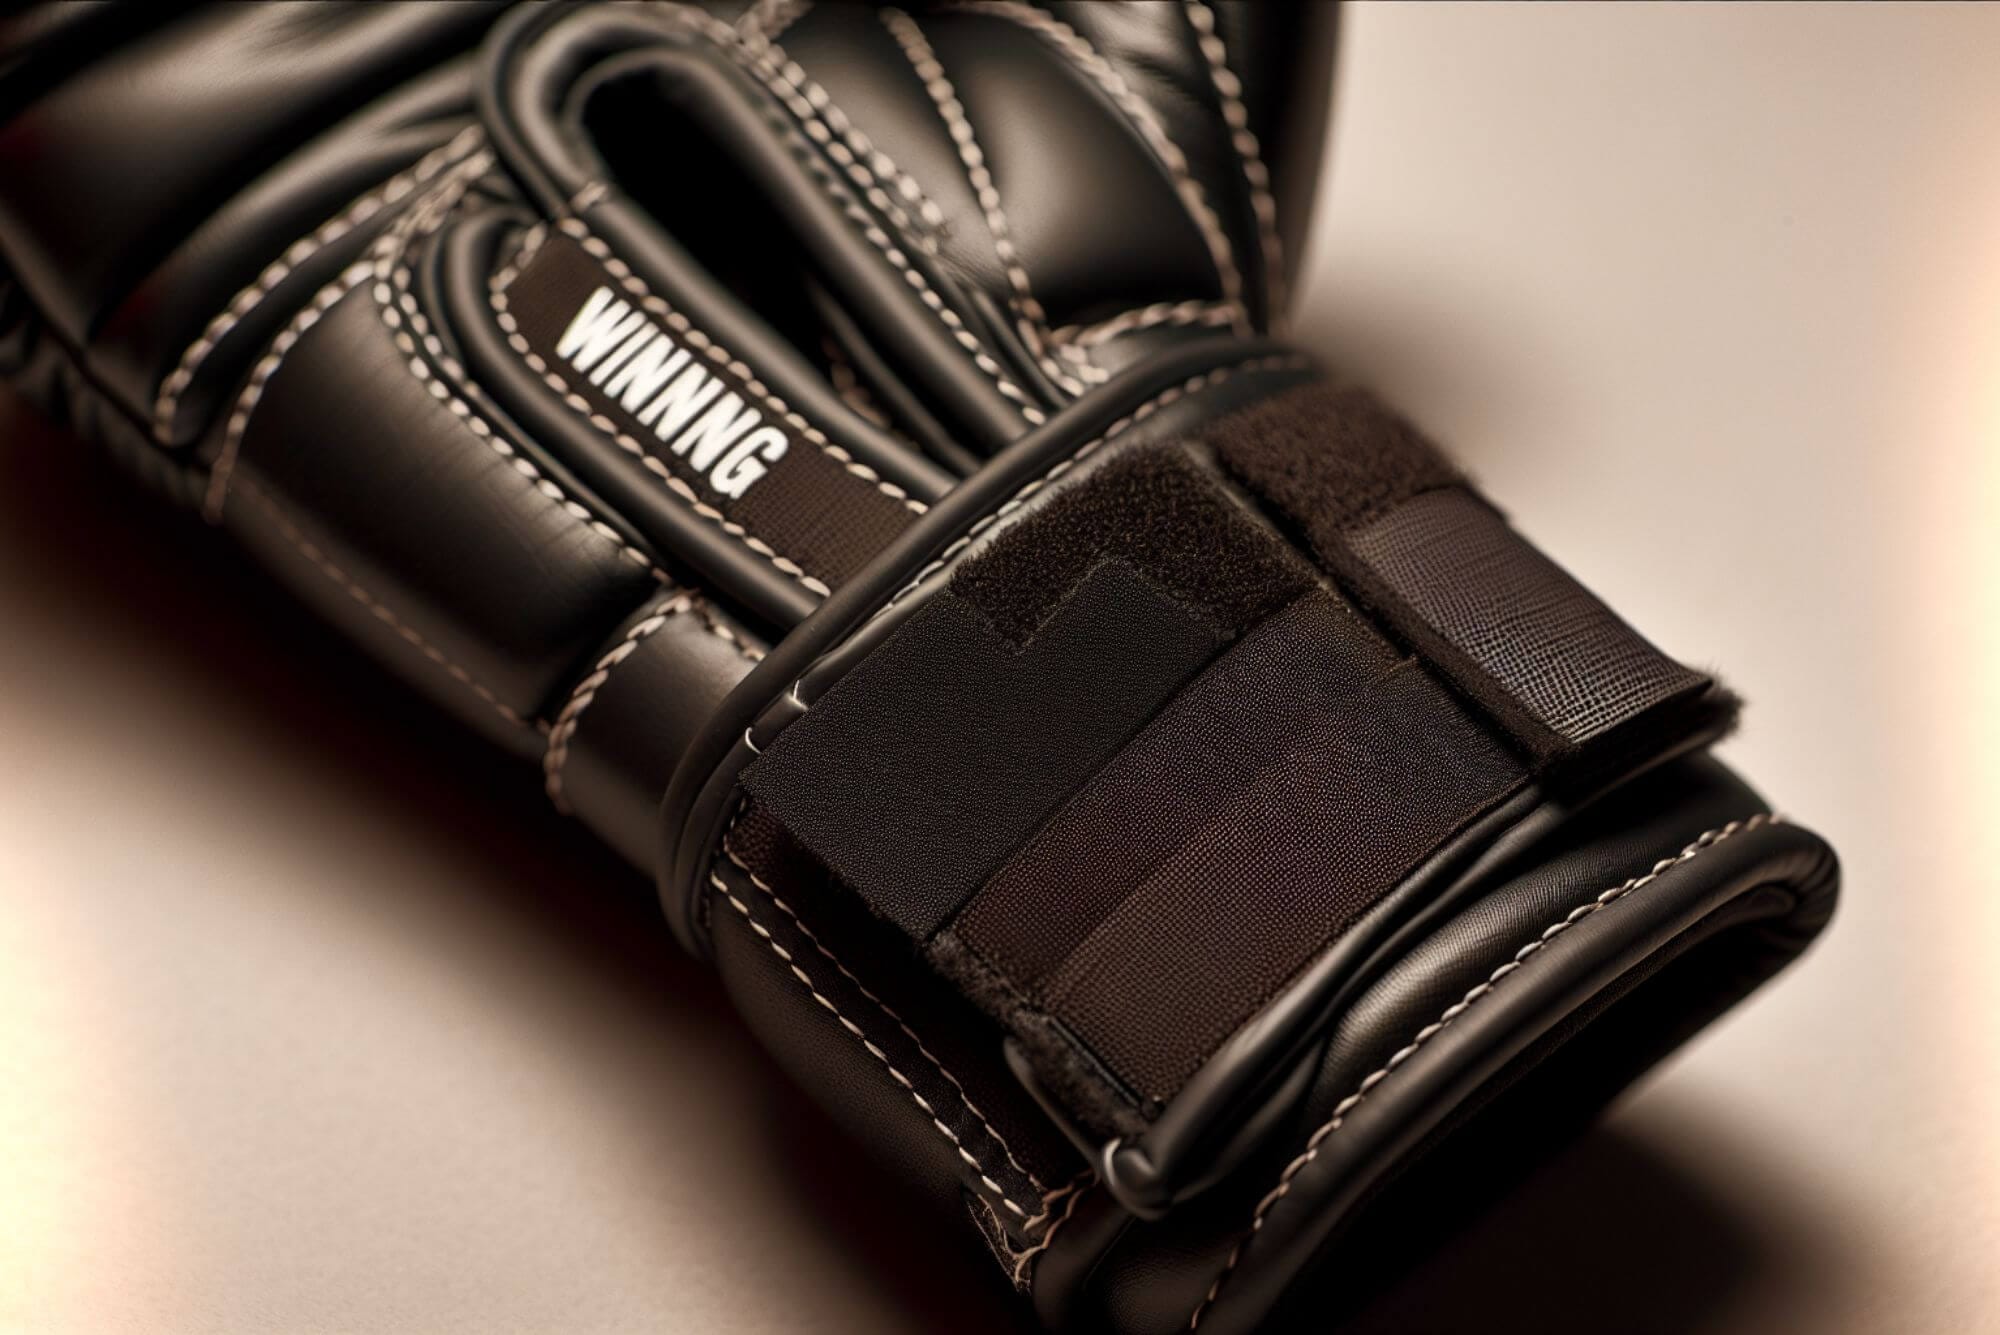 Wrist support in boxing gloves